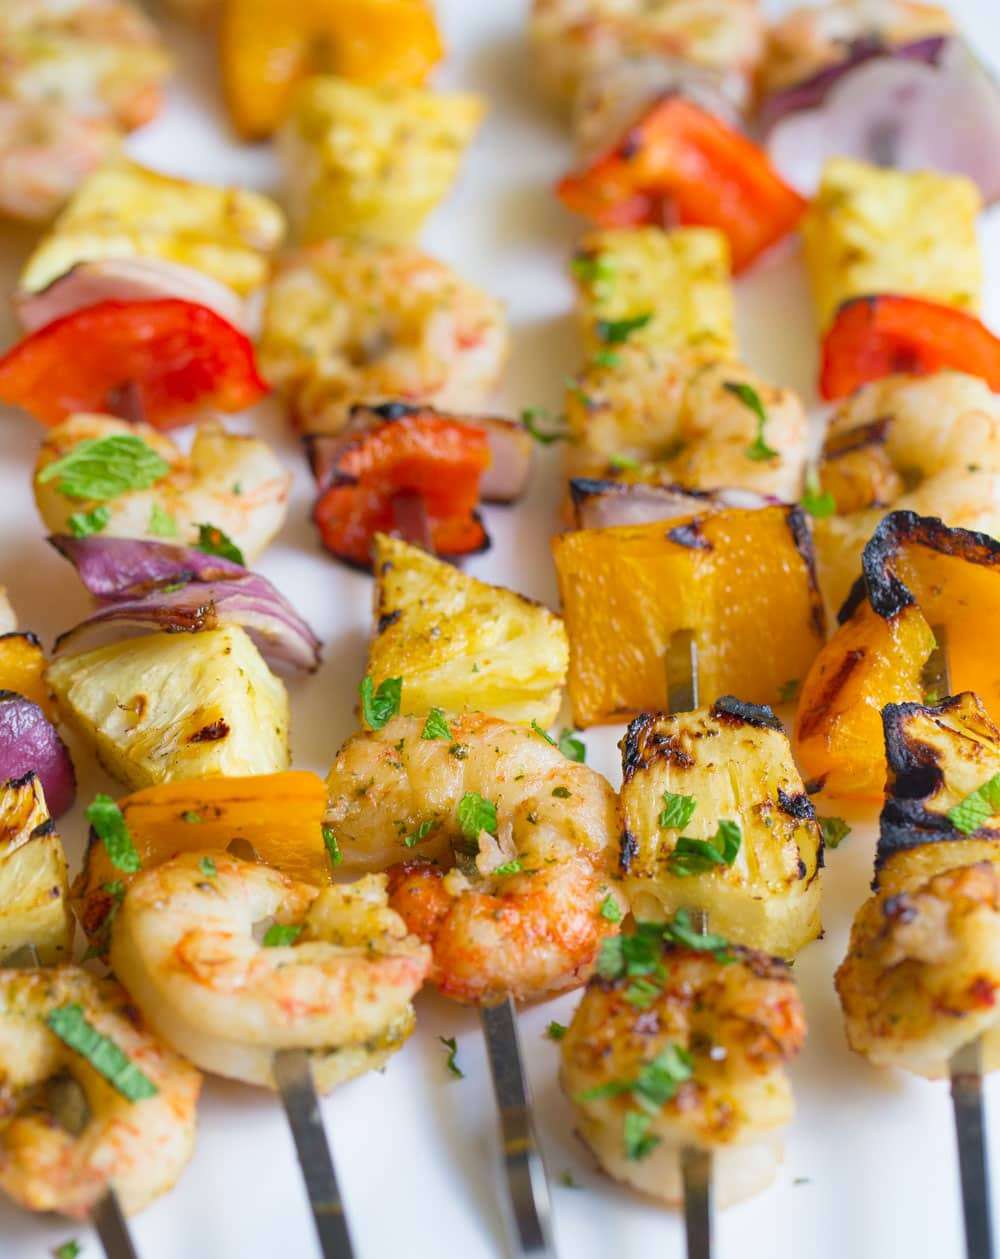 Grilled Shrimp Skewers with Pineapple Mint Marinade